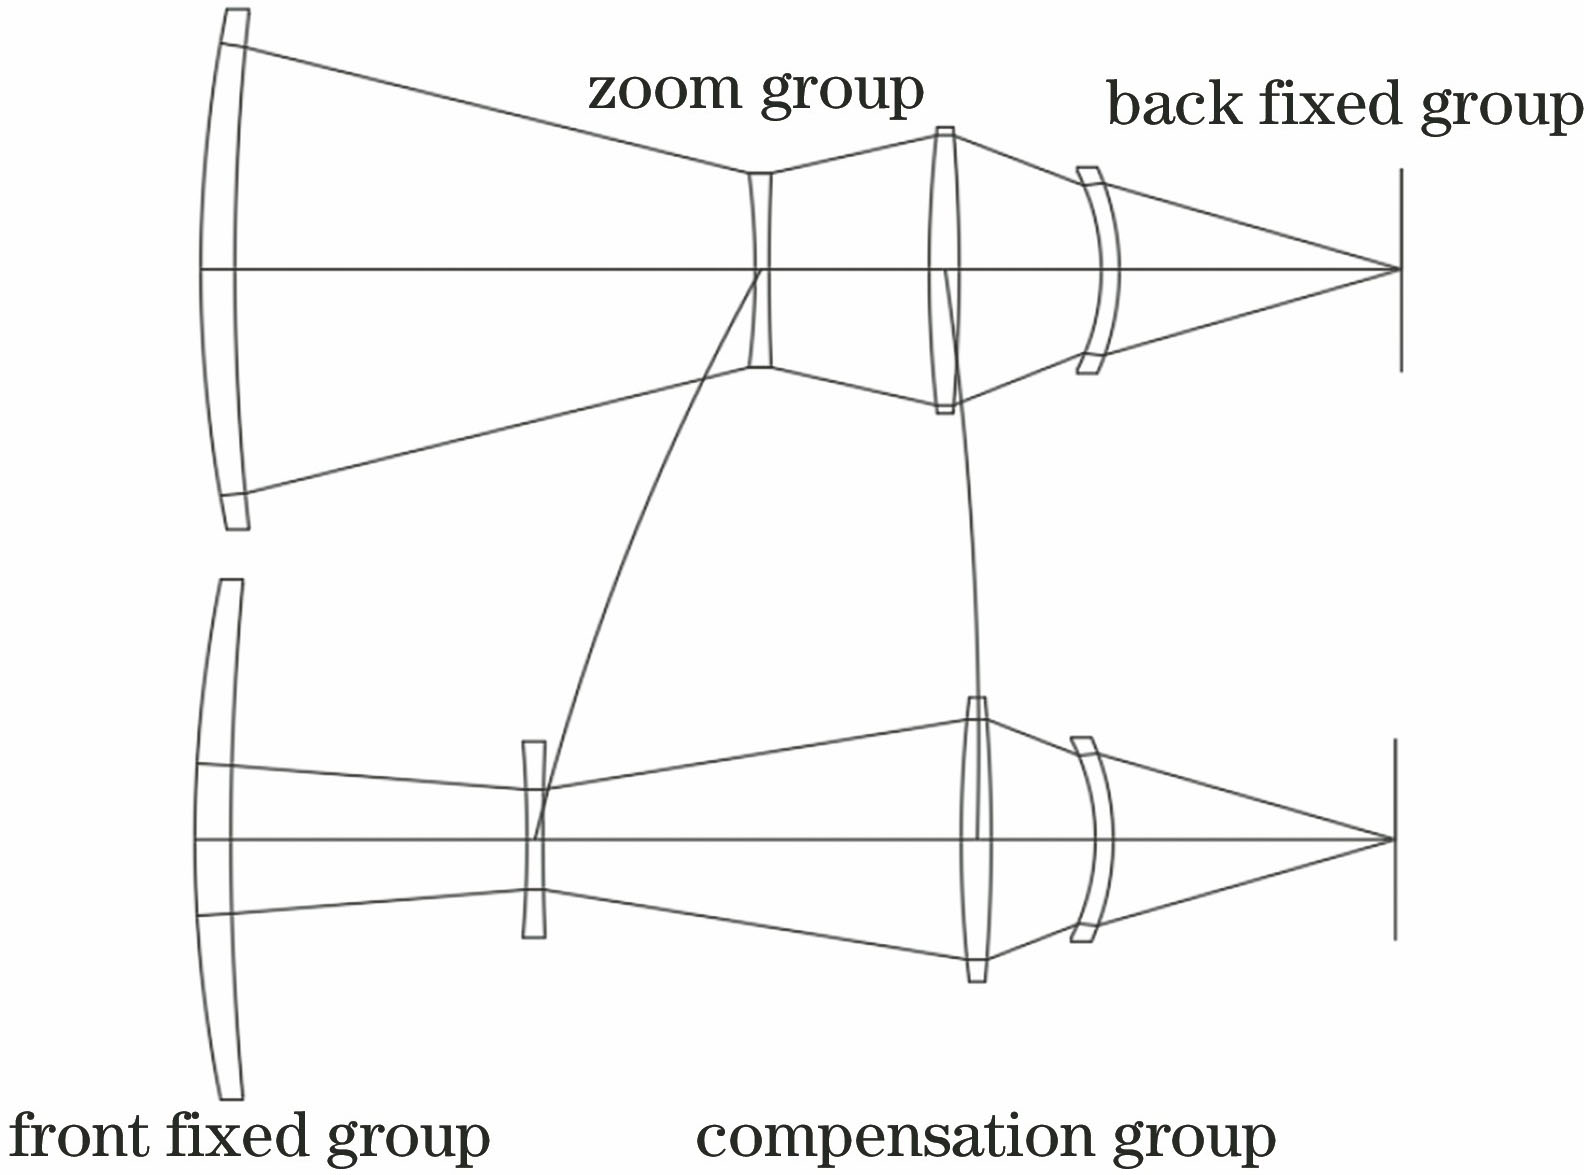 Schematic of traditional four-component zoom system